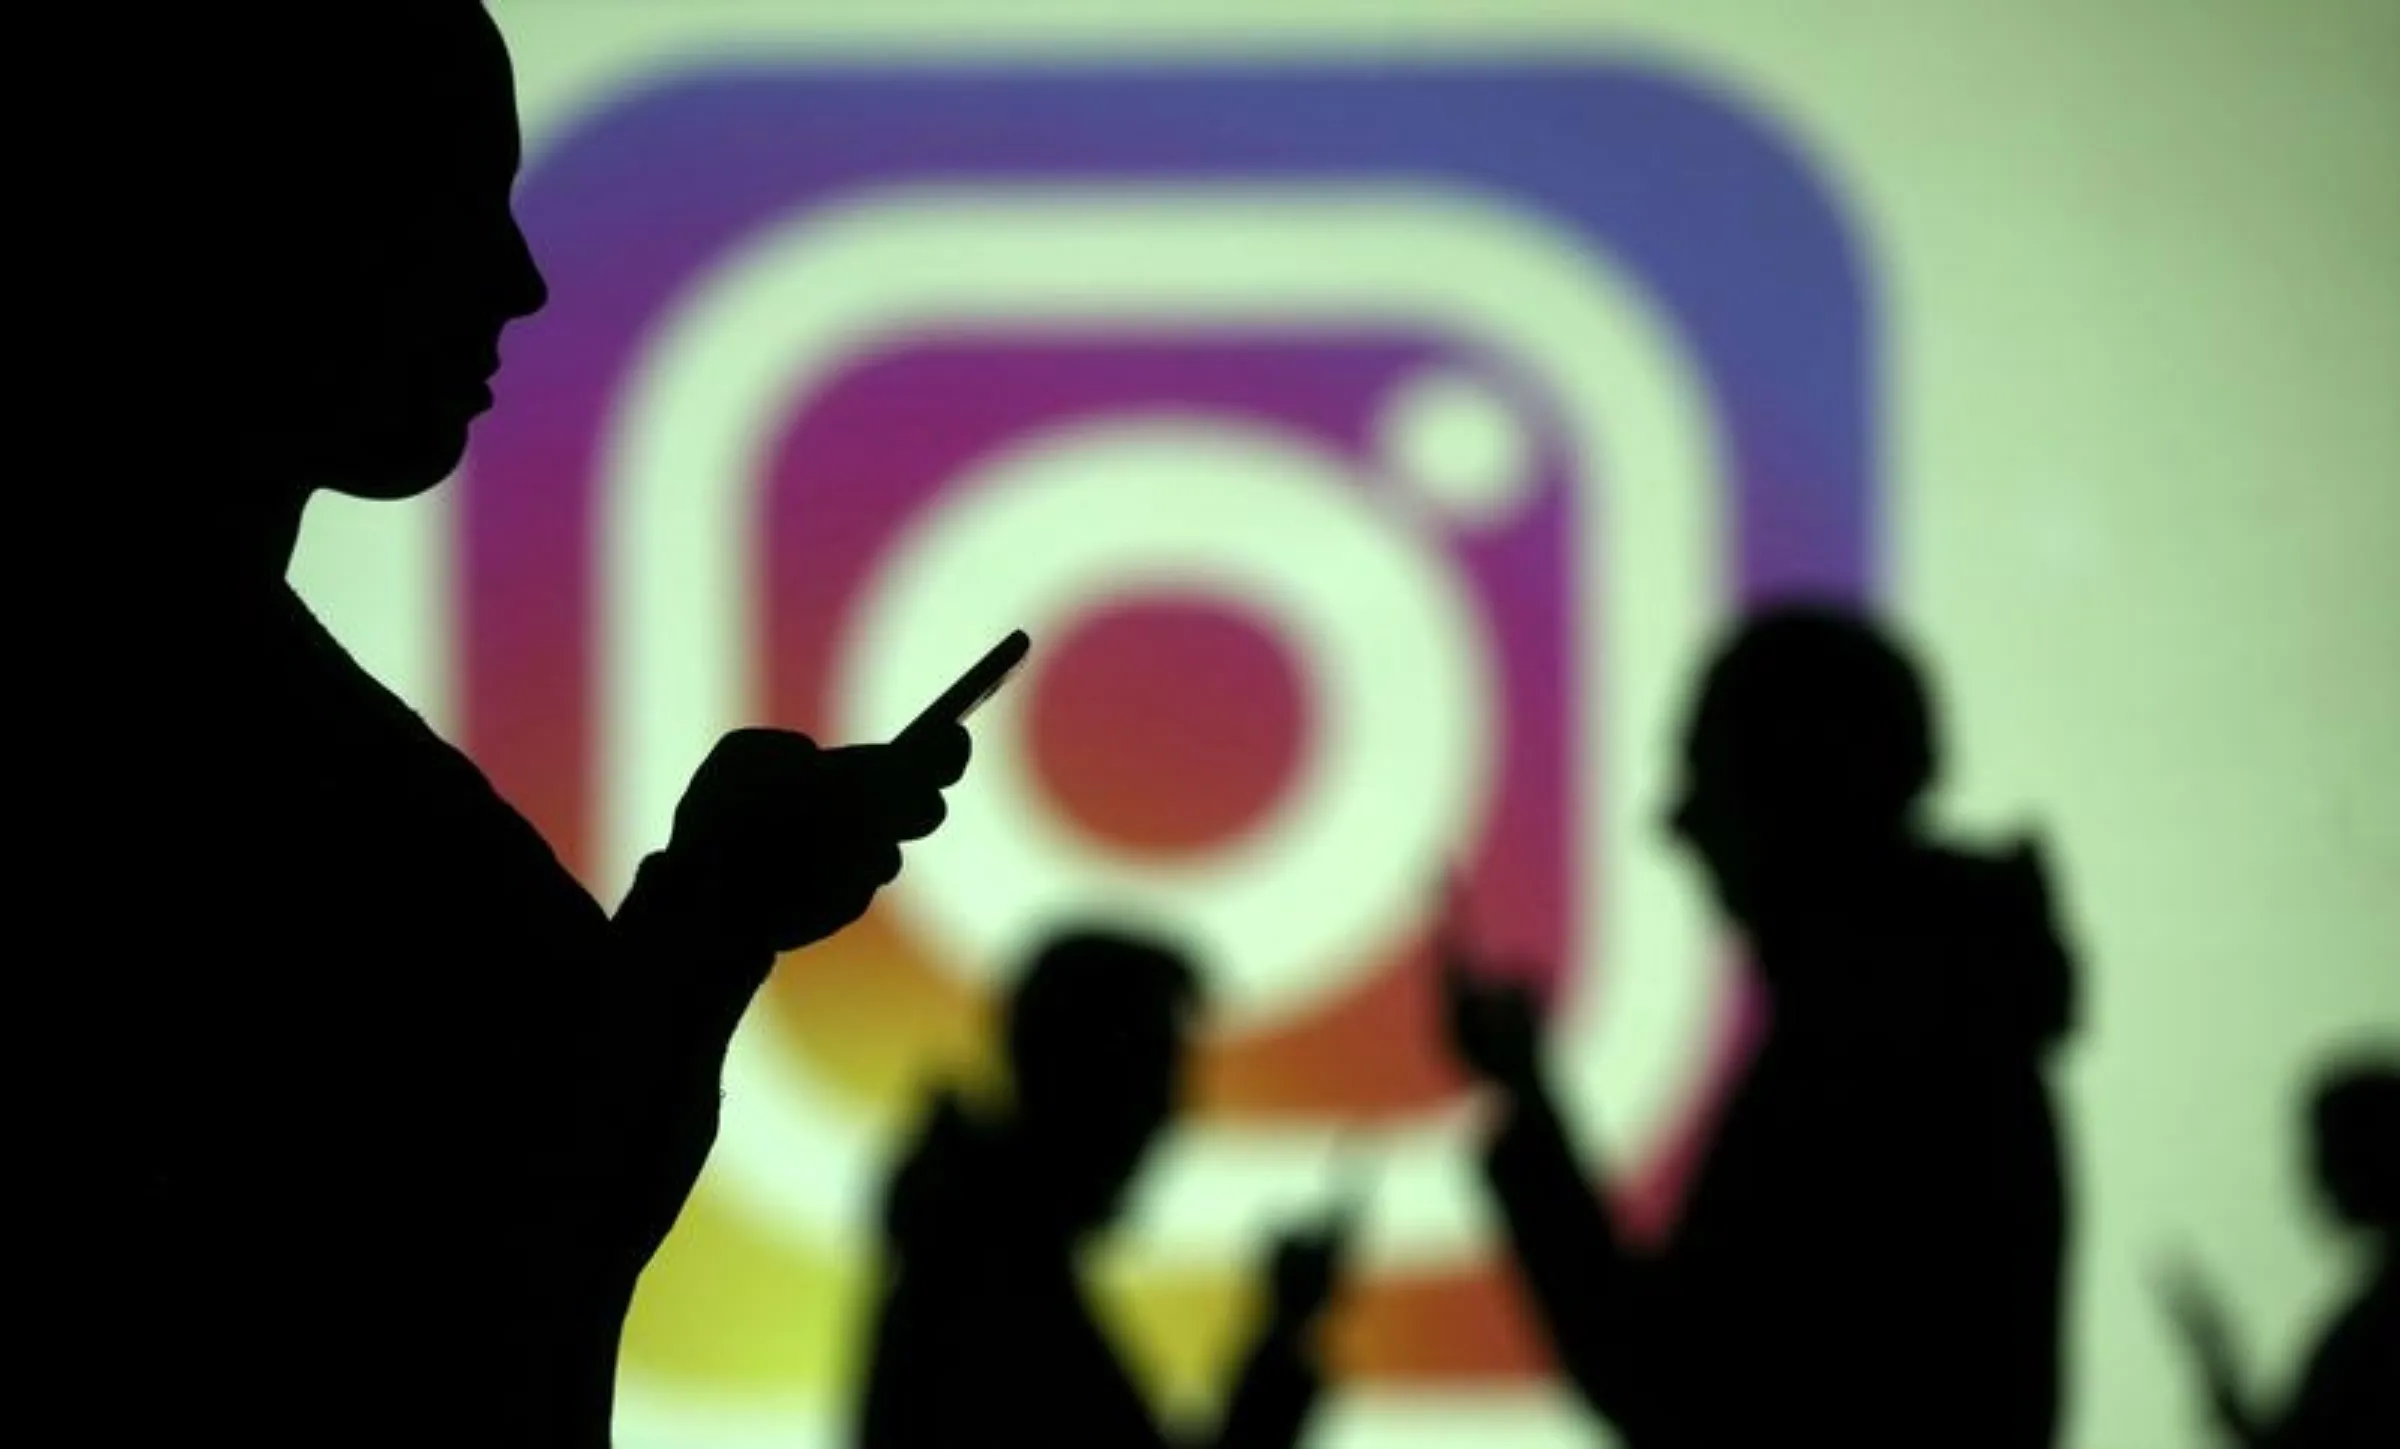 Silhouettes of mobile users are seen next to a screen projection of Instagram logo in this picture illustration taken March 28, 2018. REUTERS/Dado Ruvic/Illustration